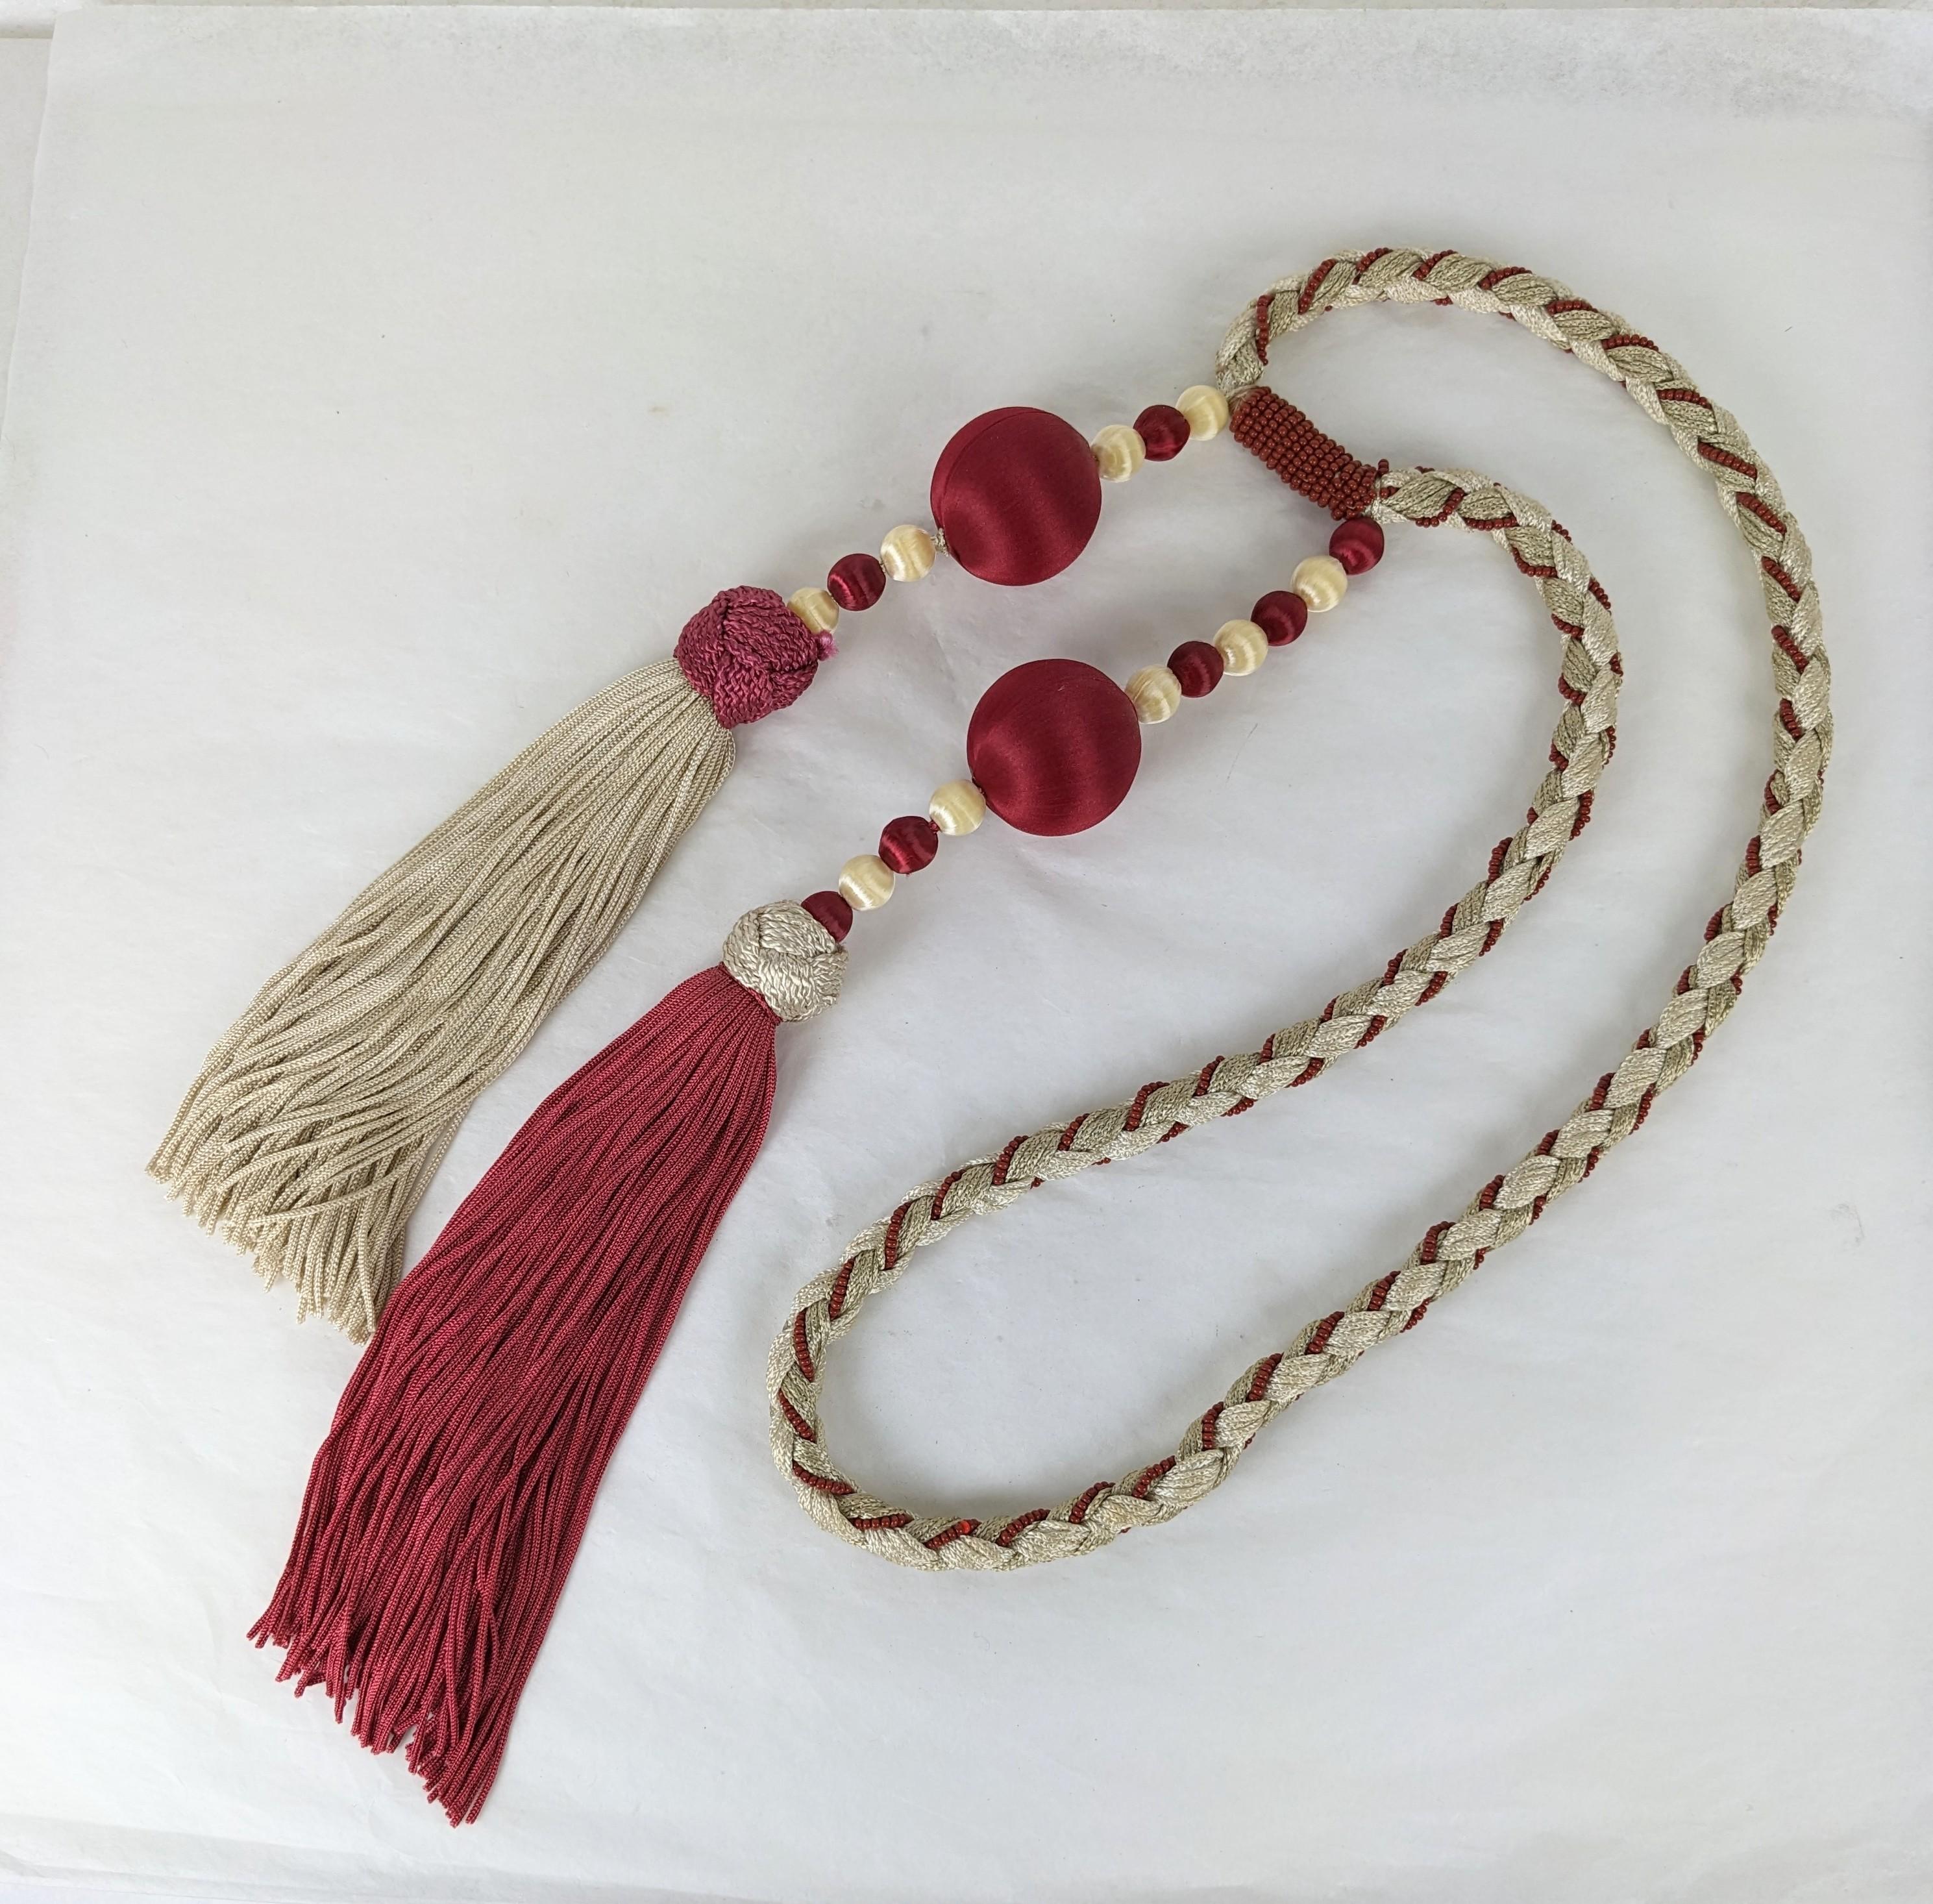 Yves Saint Laurent Chinese Collection passementerie sautoir. Composed of palest ivory braided cord woven with tiny burgundy seed beads. Two large ivory colored and burgundy colored tassels are enhanced with large and small silk beads to form the